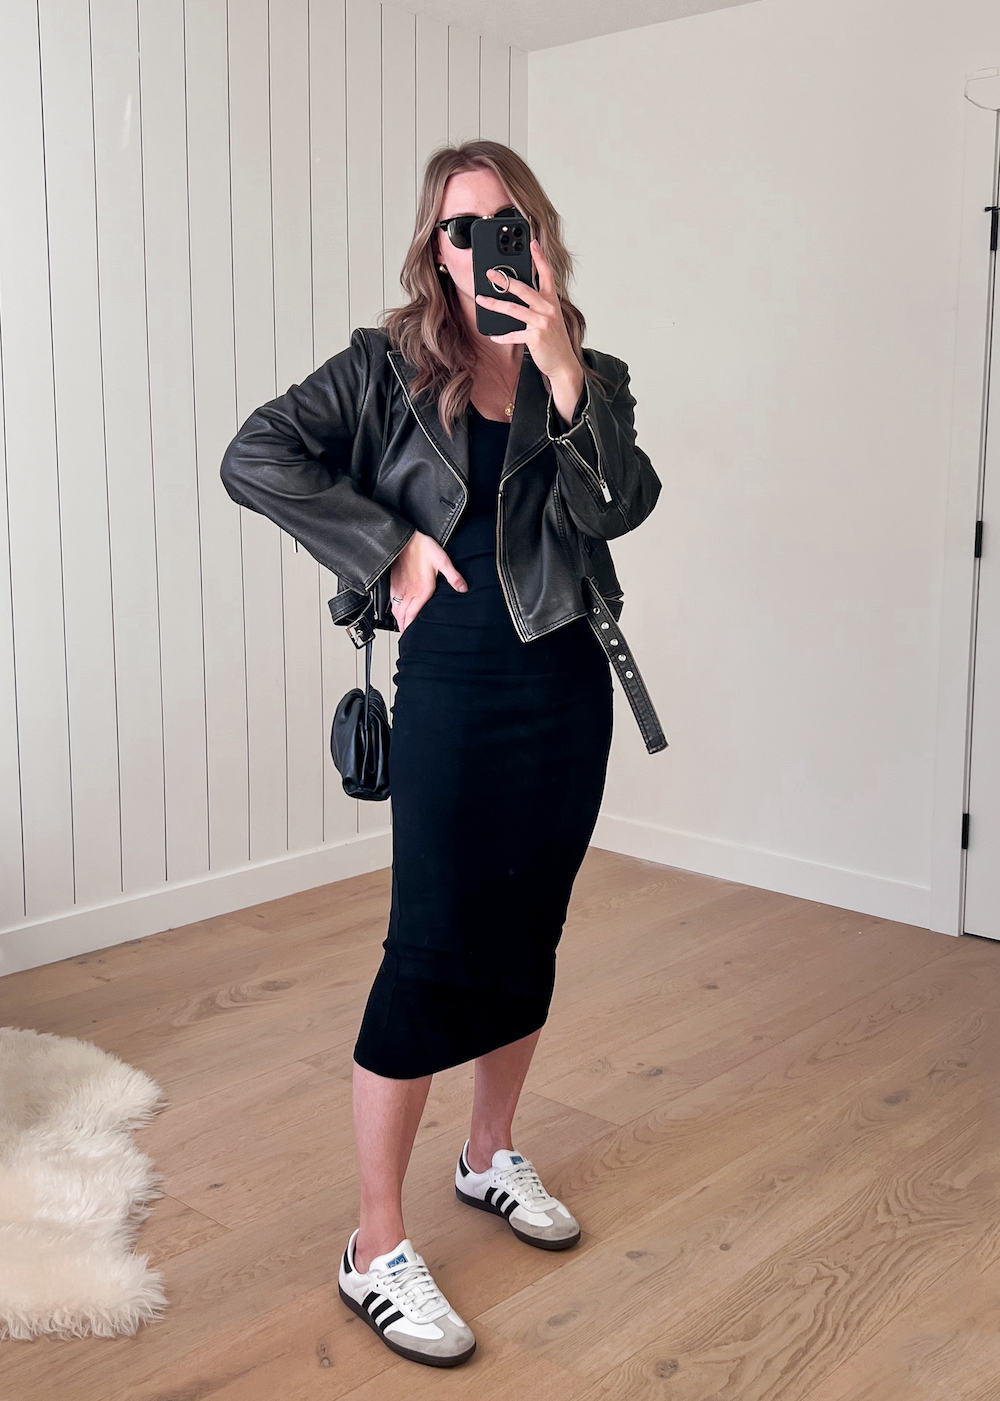 Christal wearing a knit midi dress with a black leather jacket and sneakers.